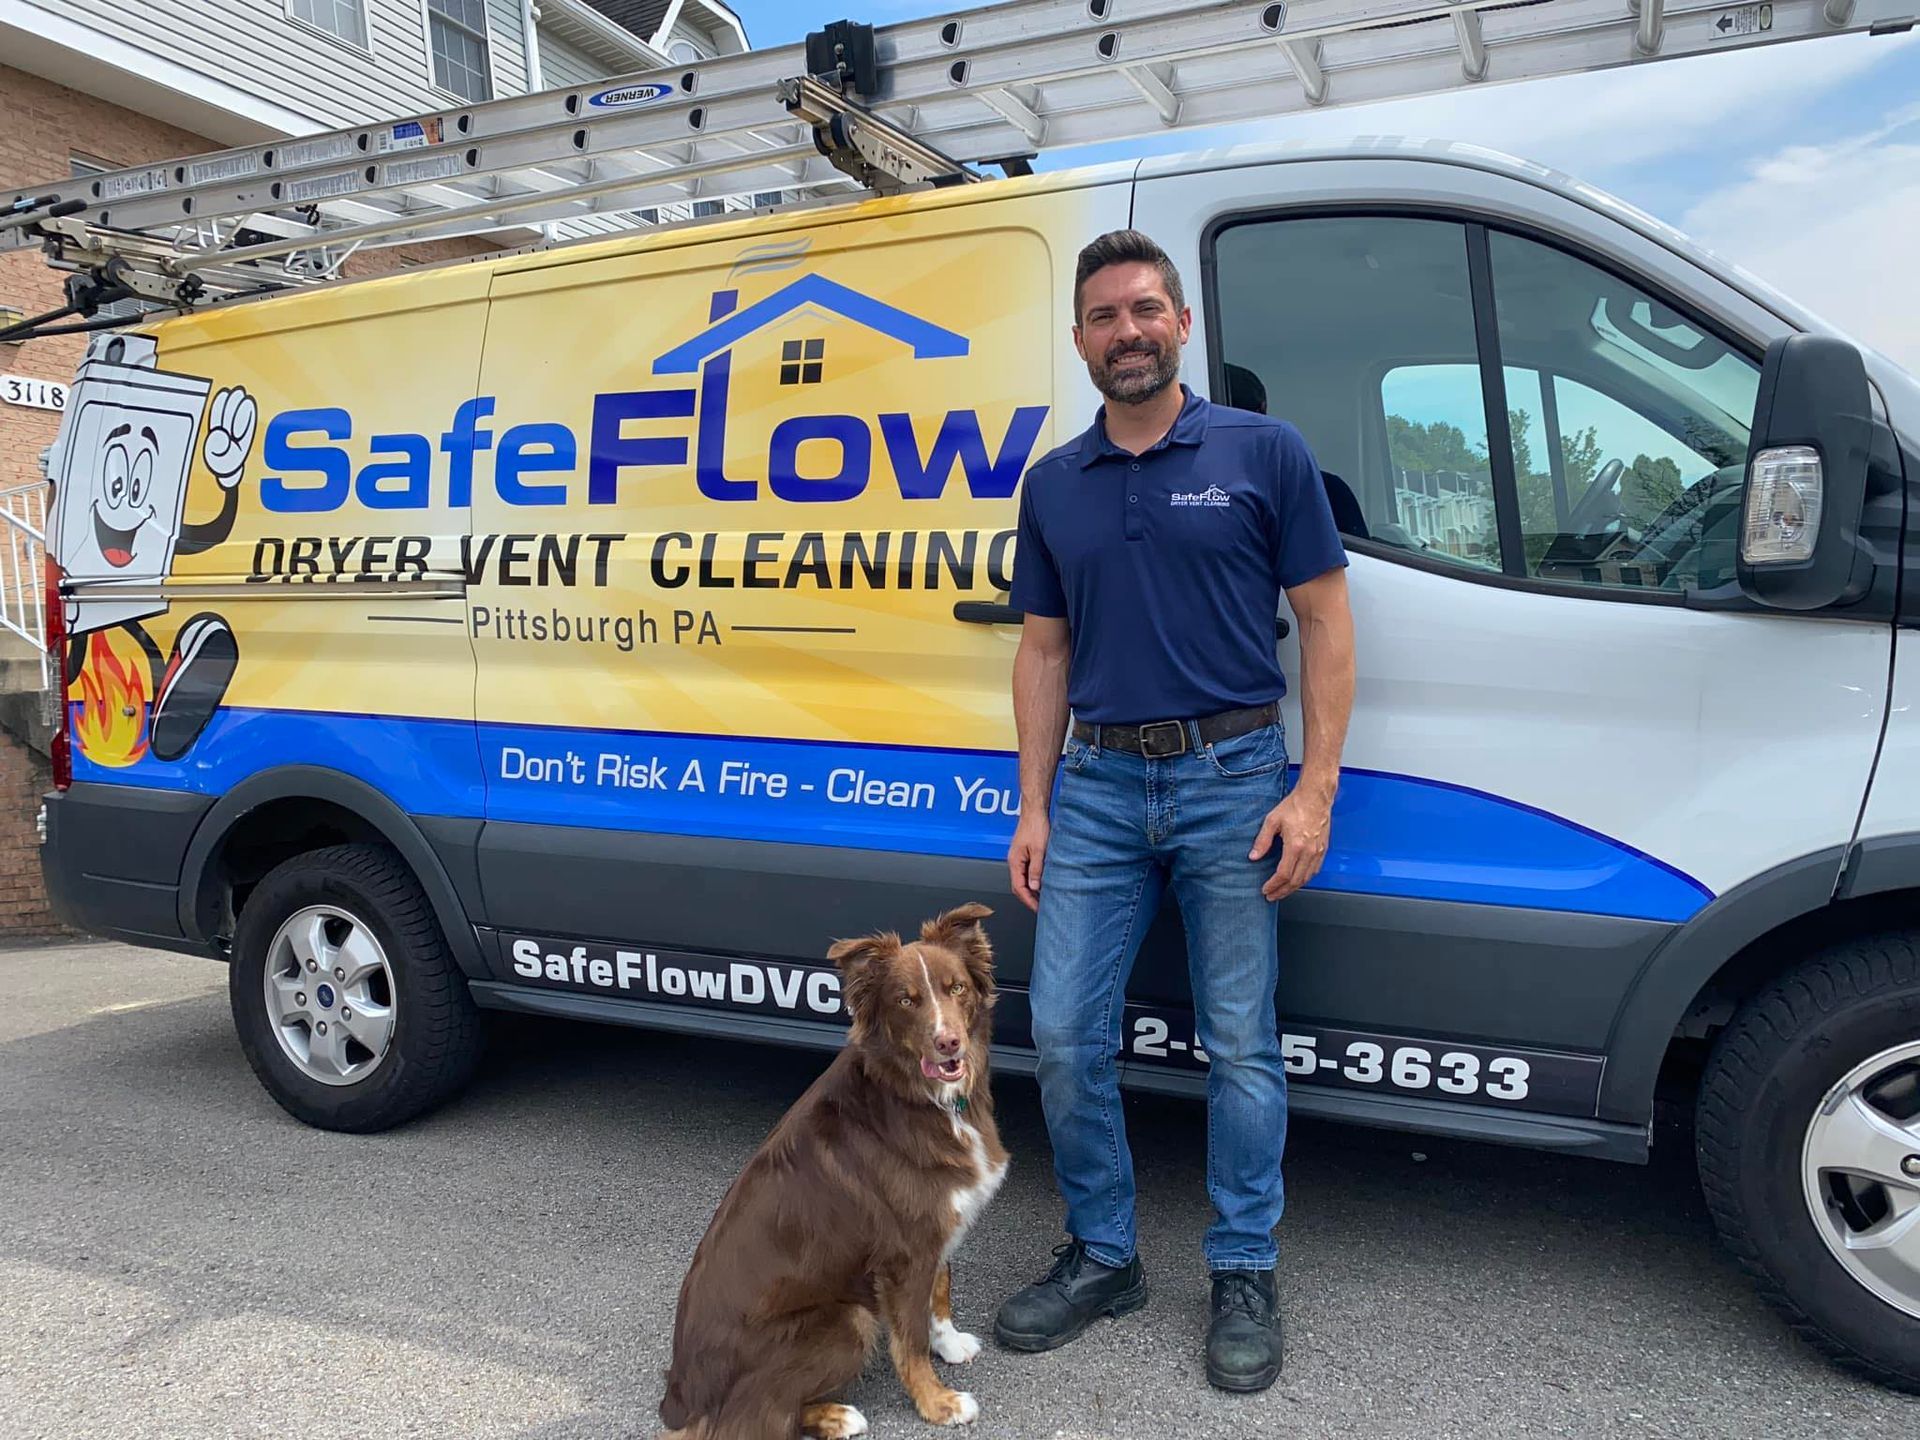 A man and a dog are standing in front of a safe flow dryer vent cleaning van.